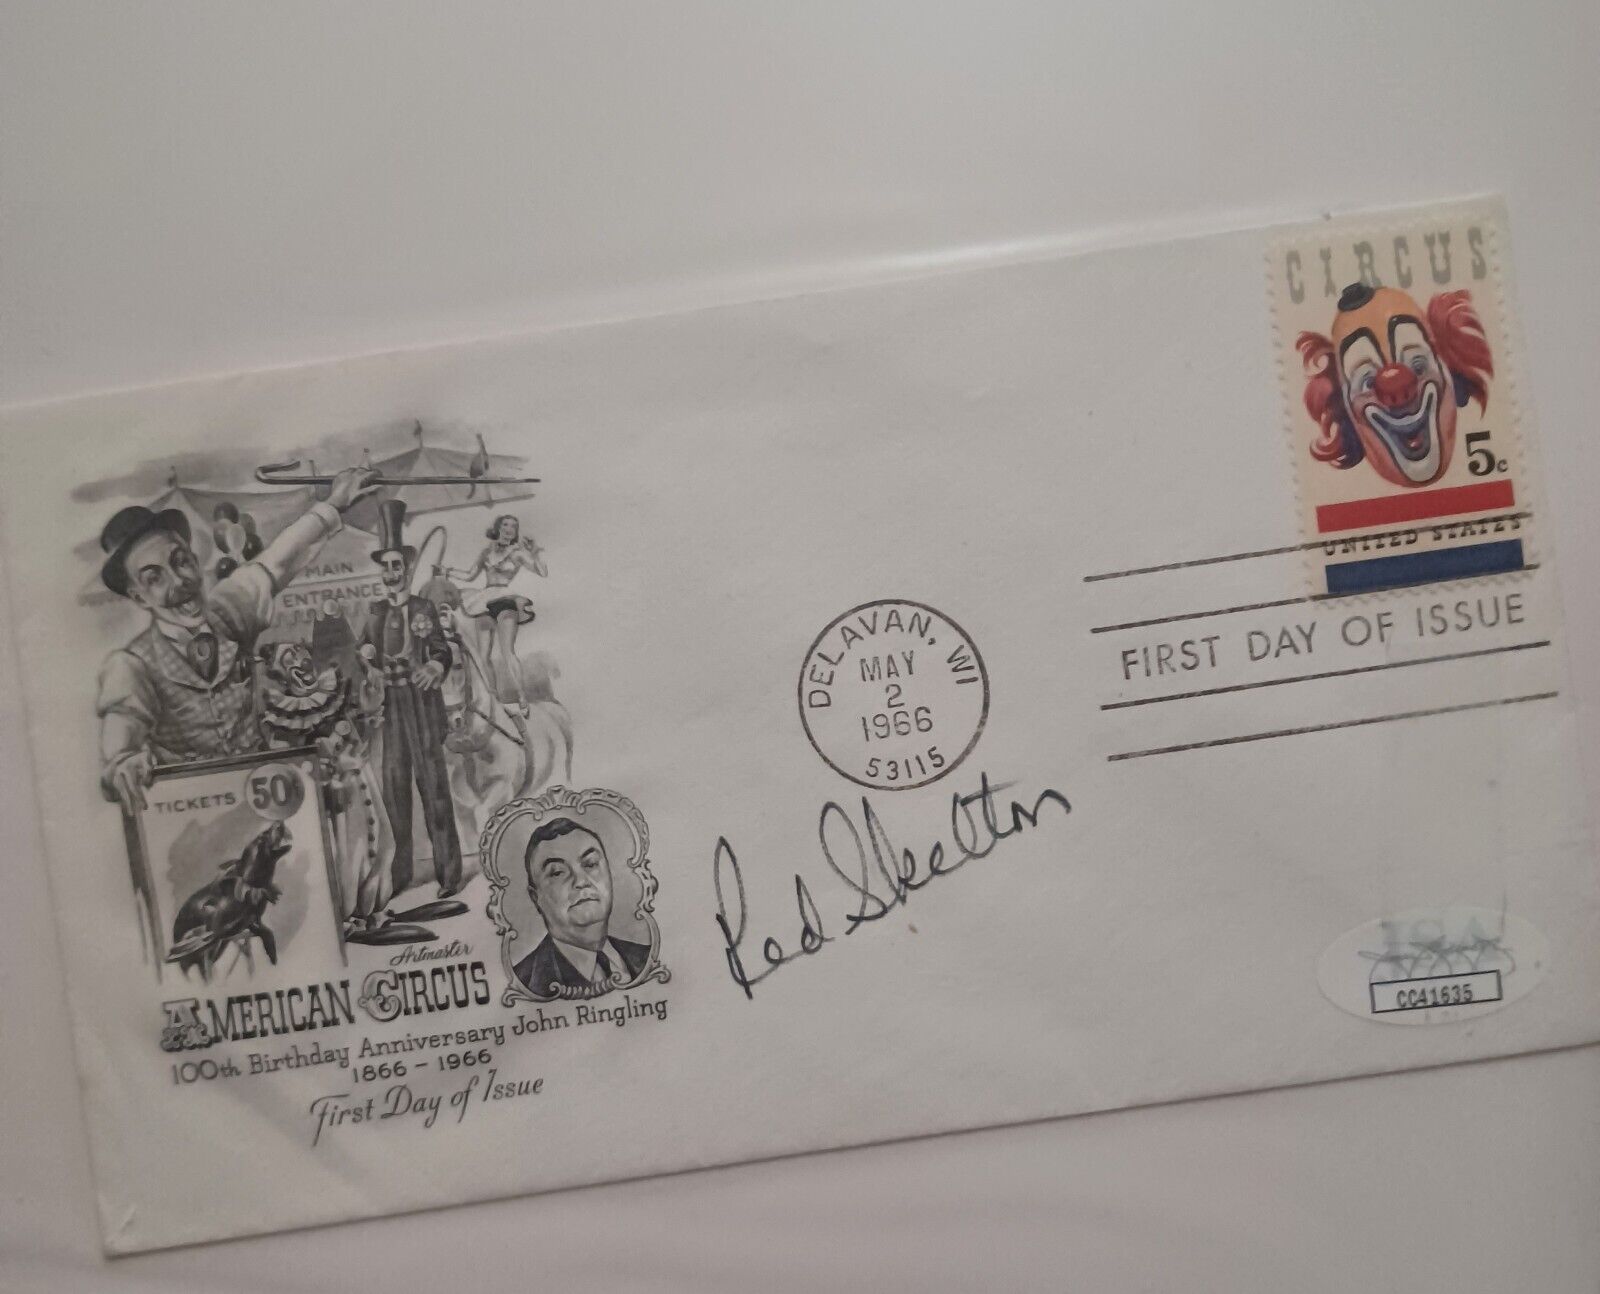 Red Skelton Pioneer Comedian Clown Signed 1st Day Cover Autograph JSA COA